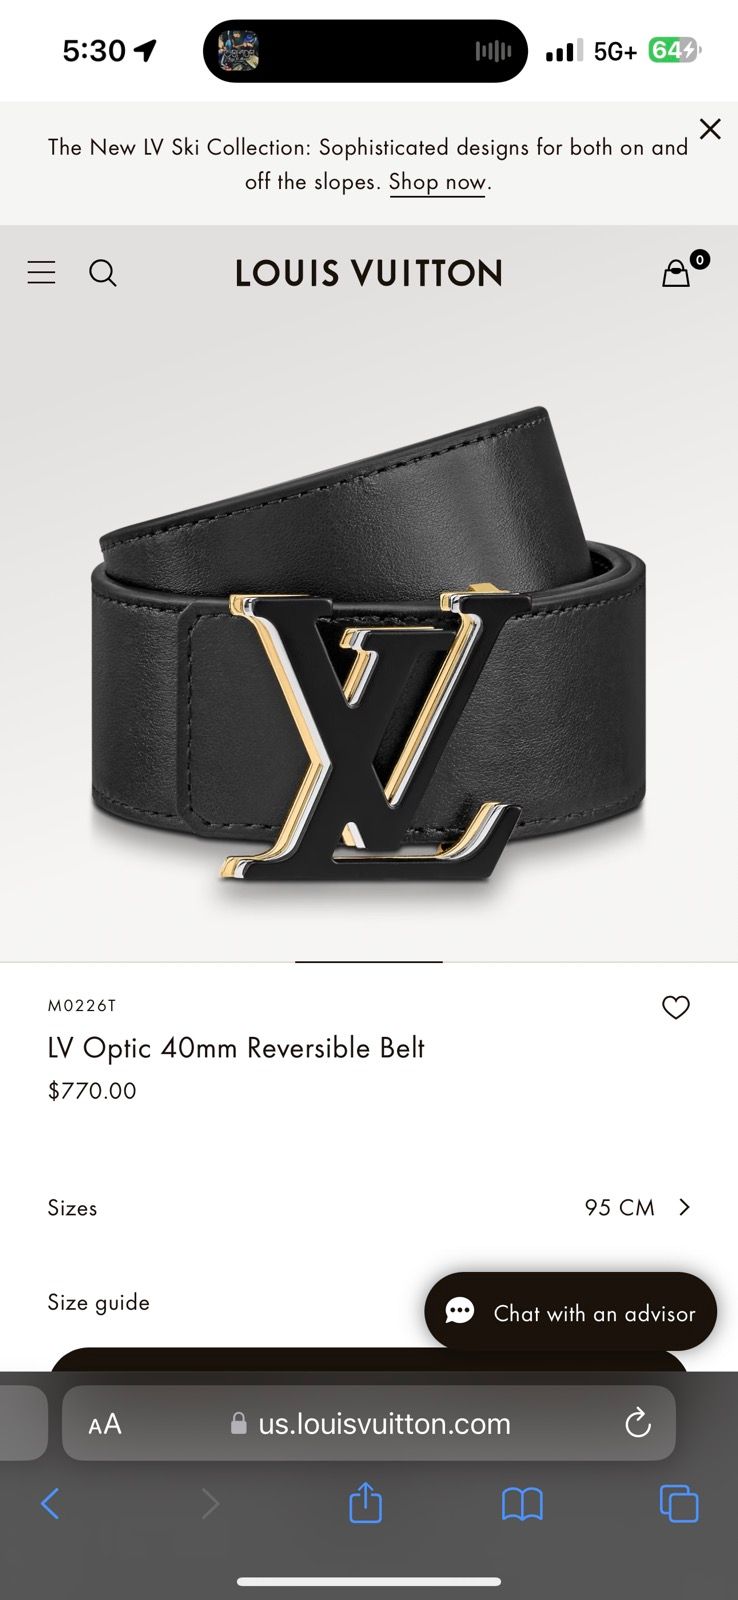 LV Optic 40mm Reversible Belt Other Leathers - Accessories